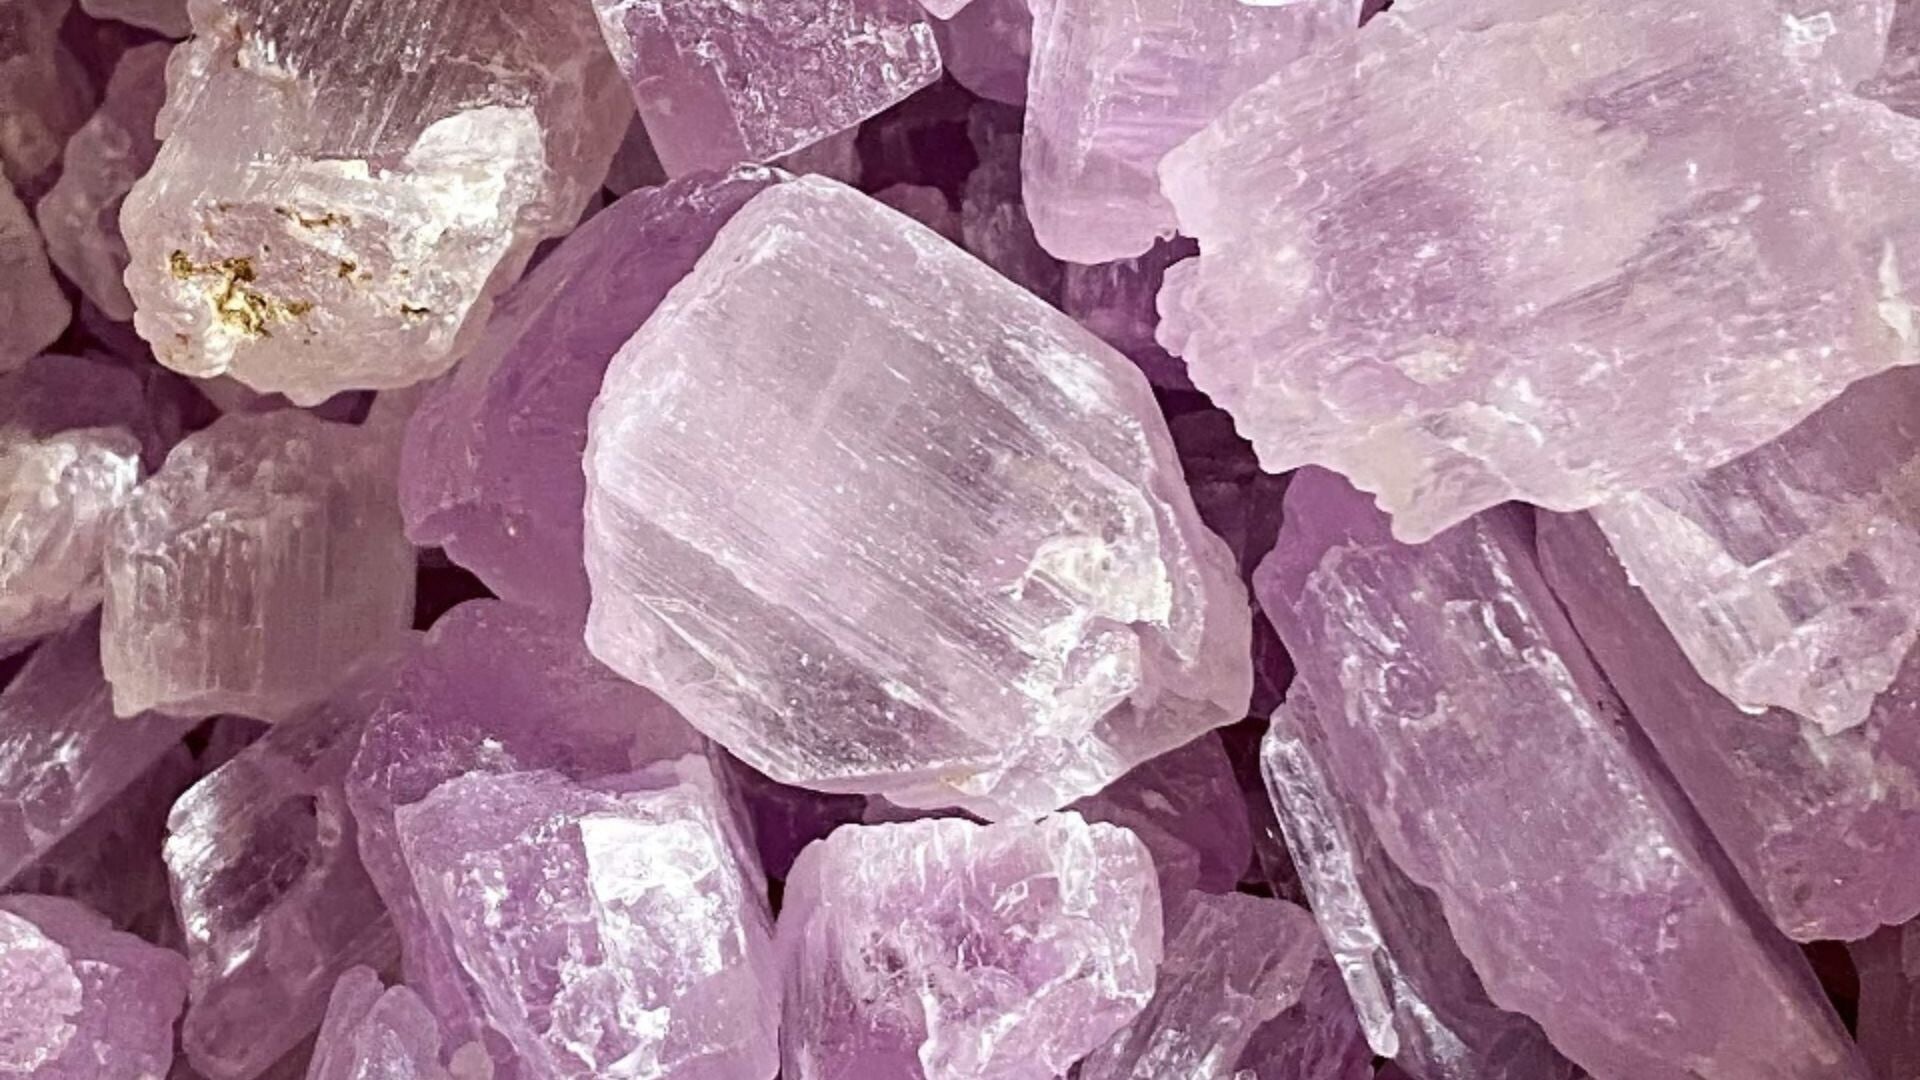 A pile of raw pink kunzite crystals